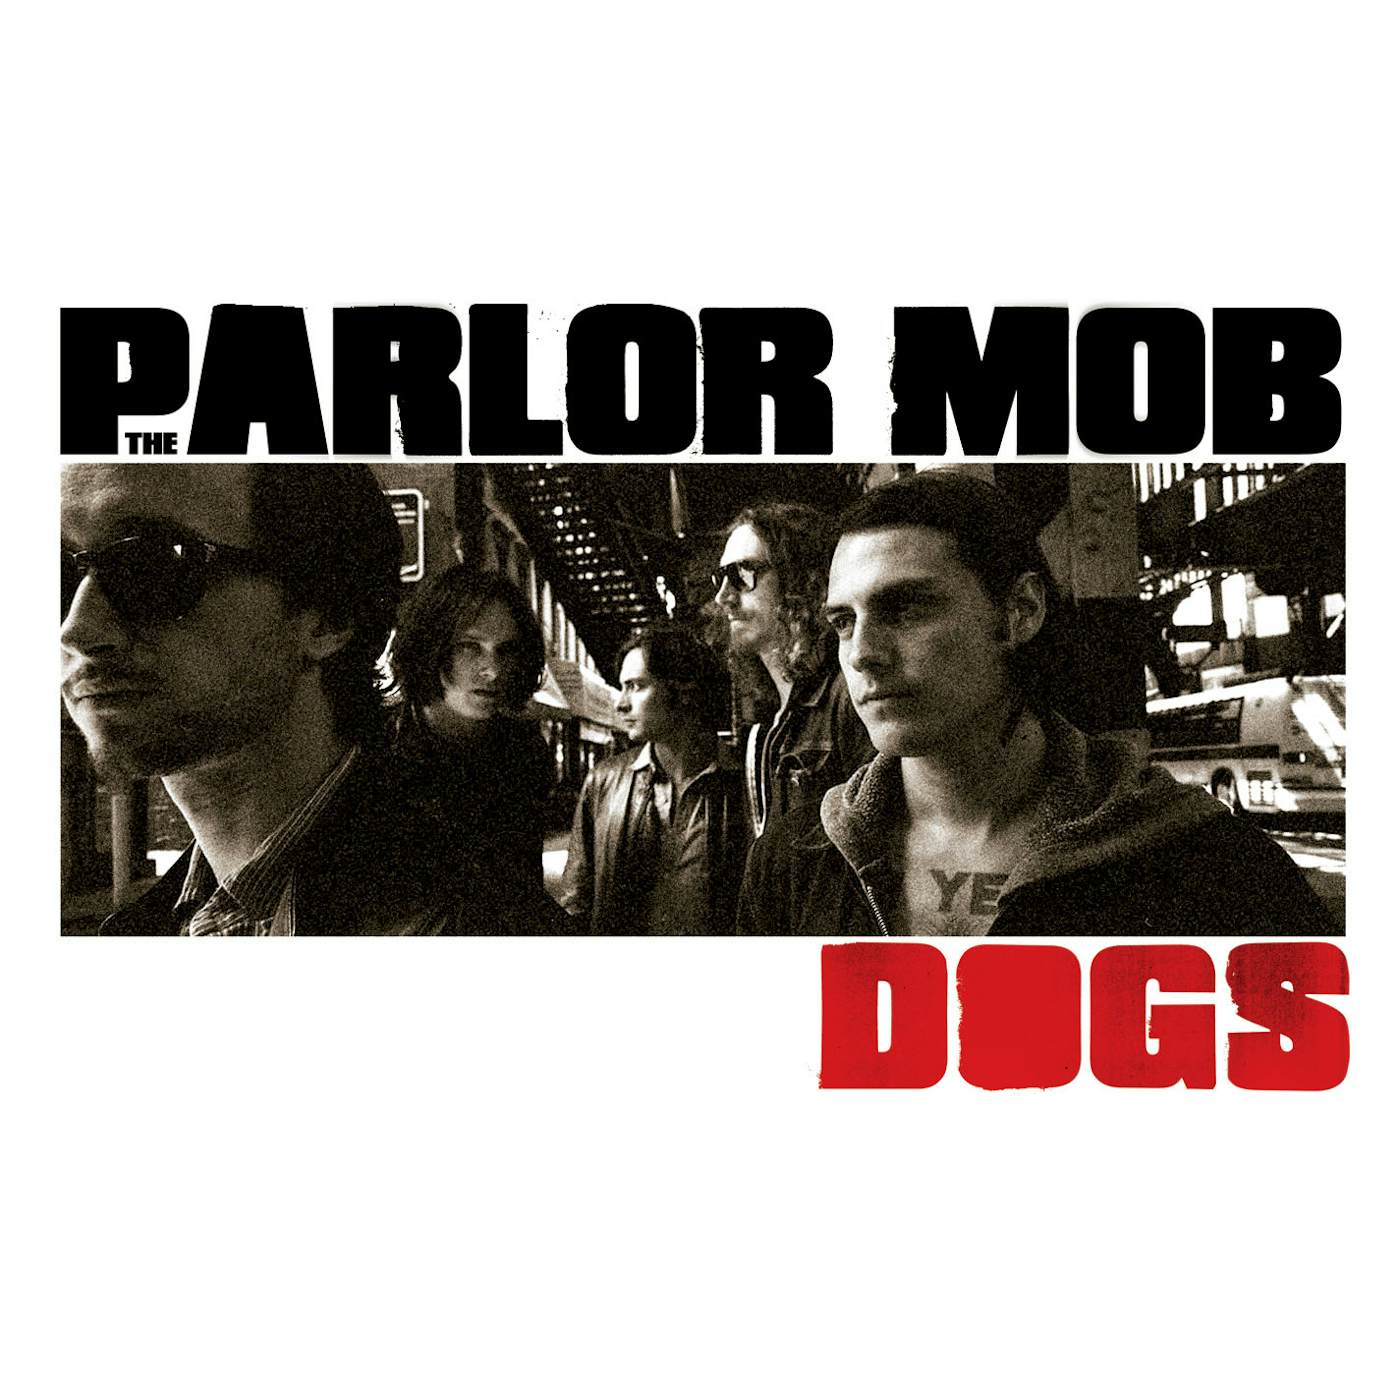 The Parlor Mob Dogs (Vinyl - 2LP W/DOWNLOAD)